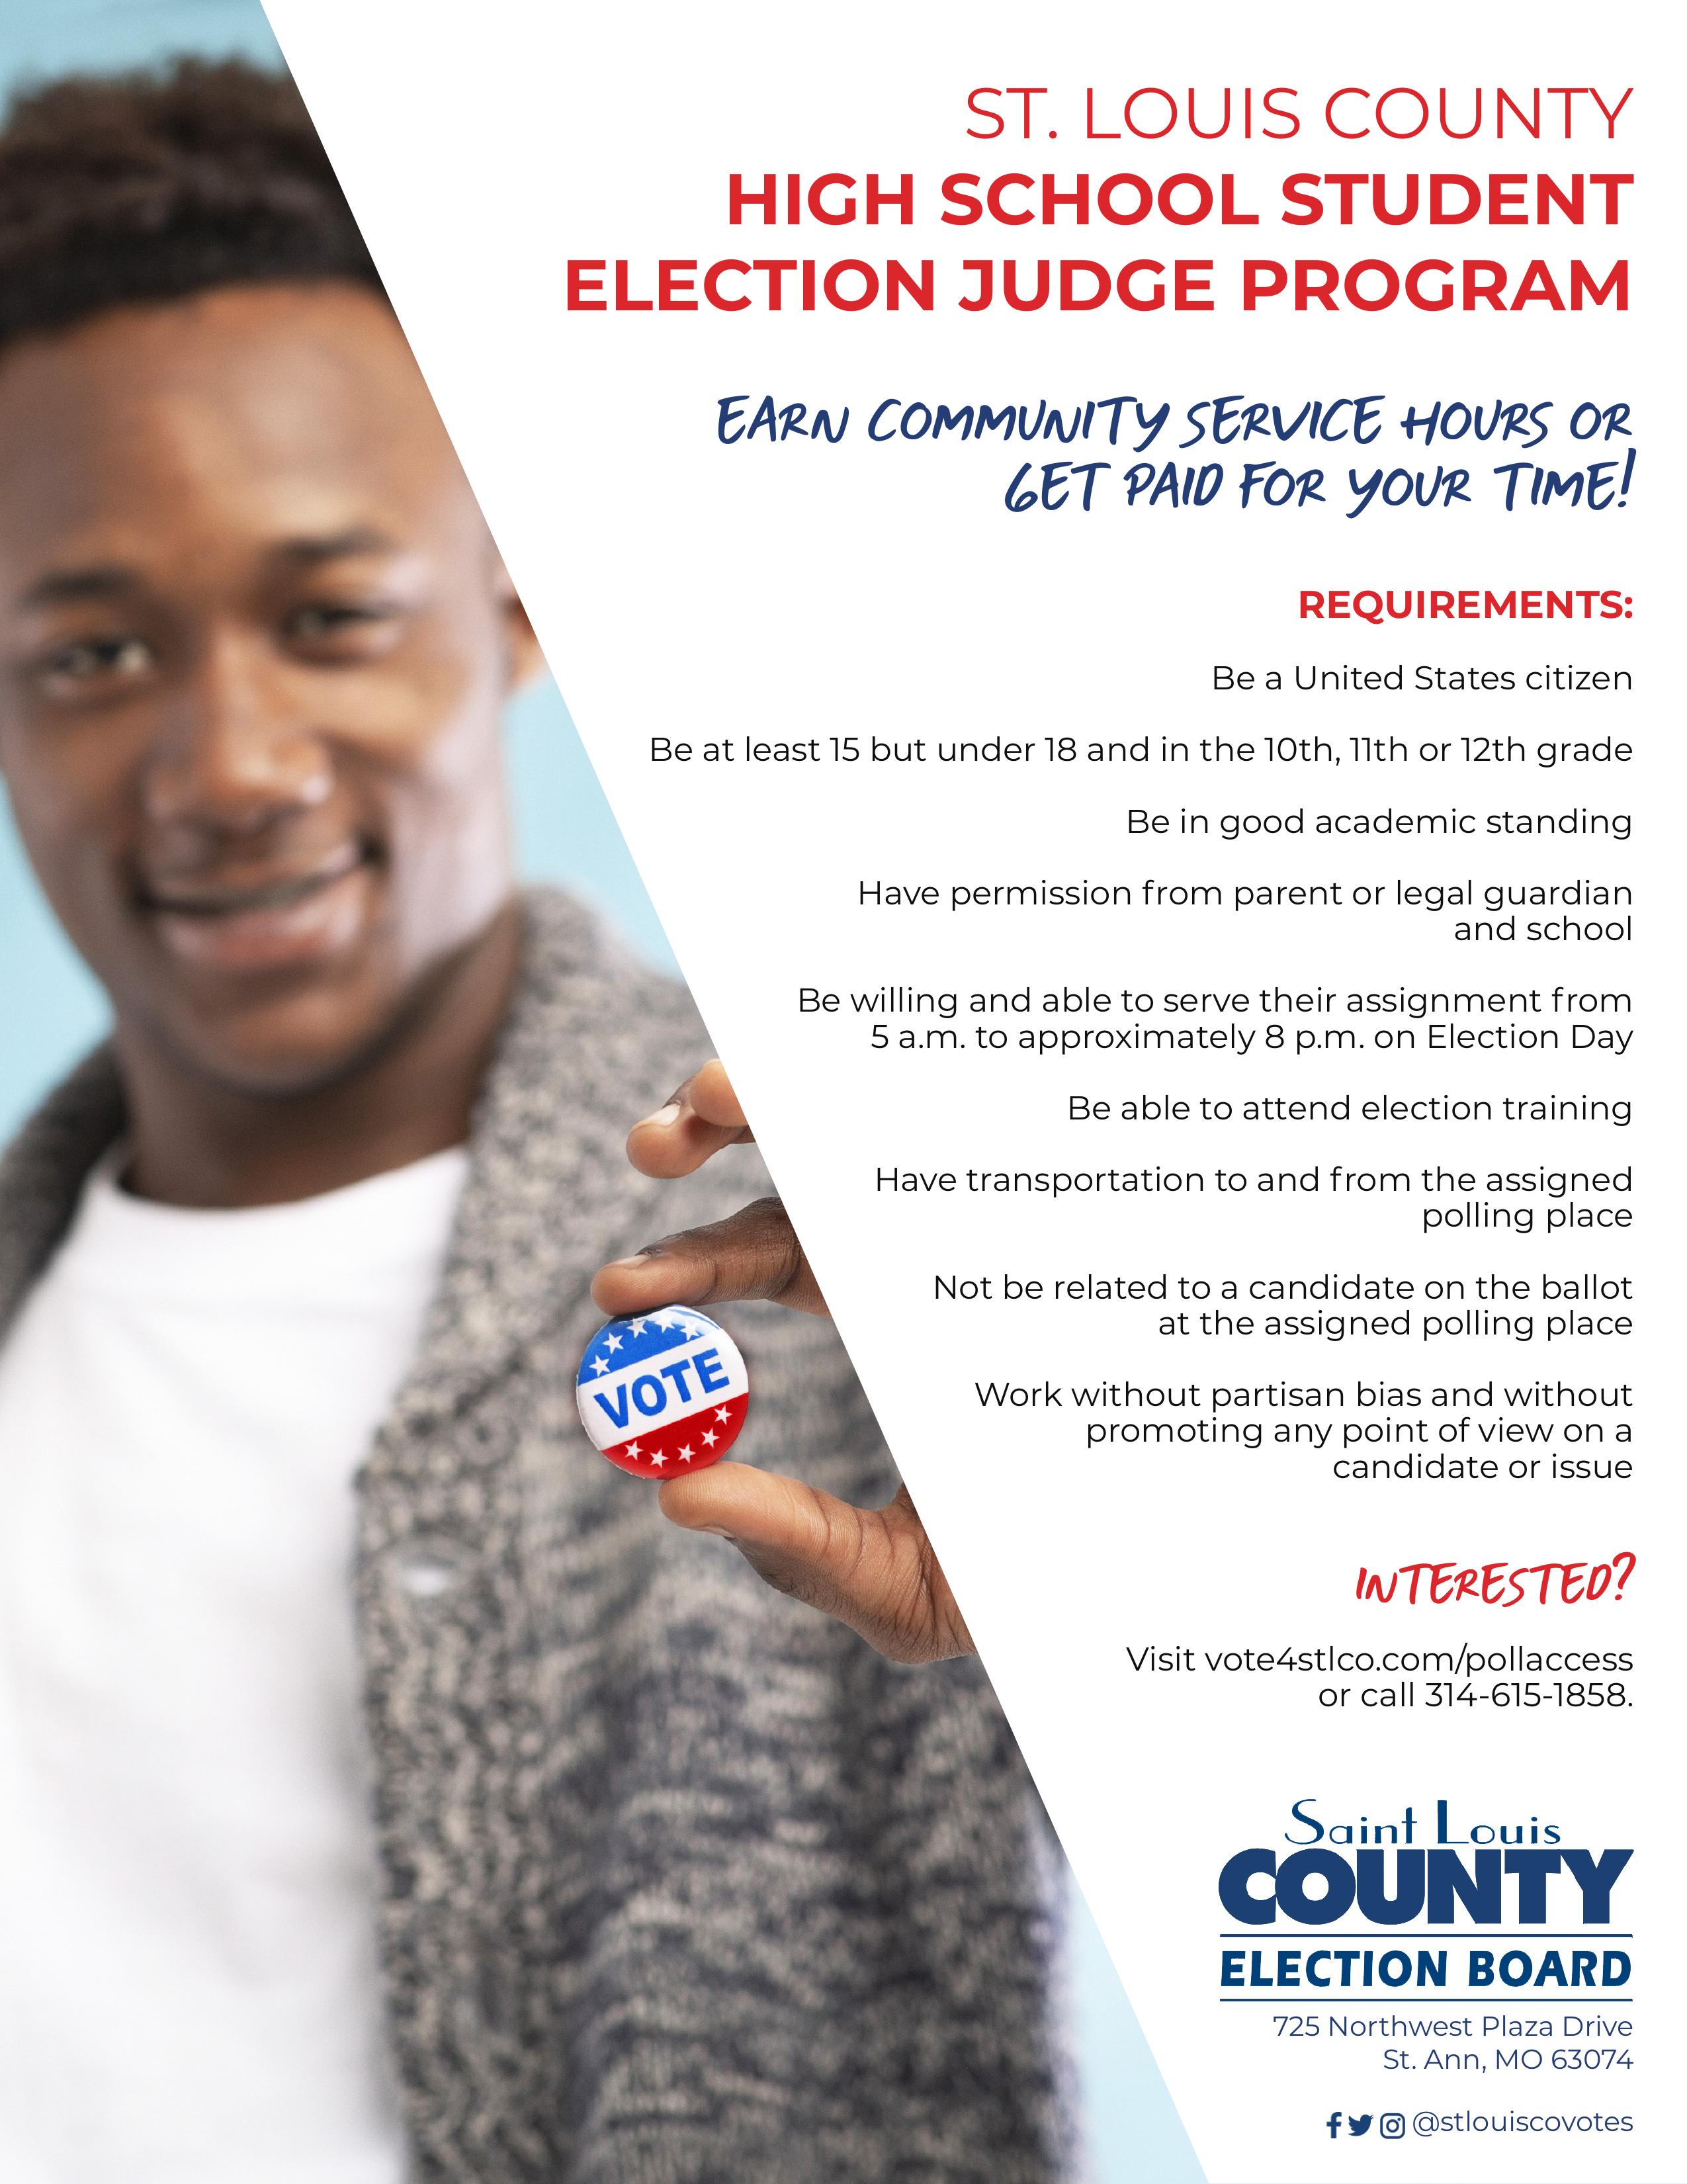 Want To Support Democracy? Be An Election Judge!